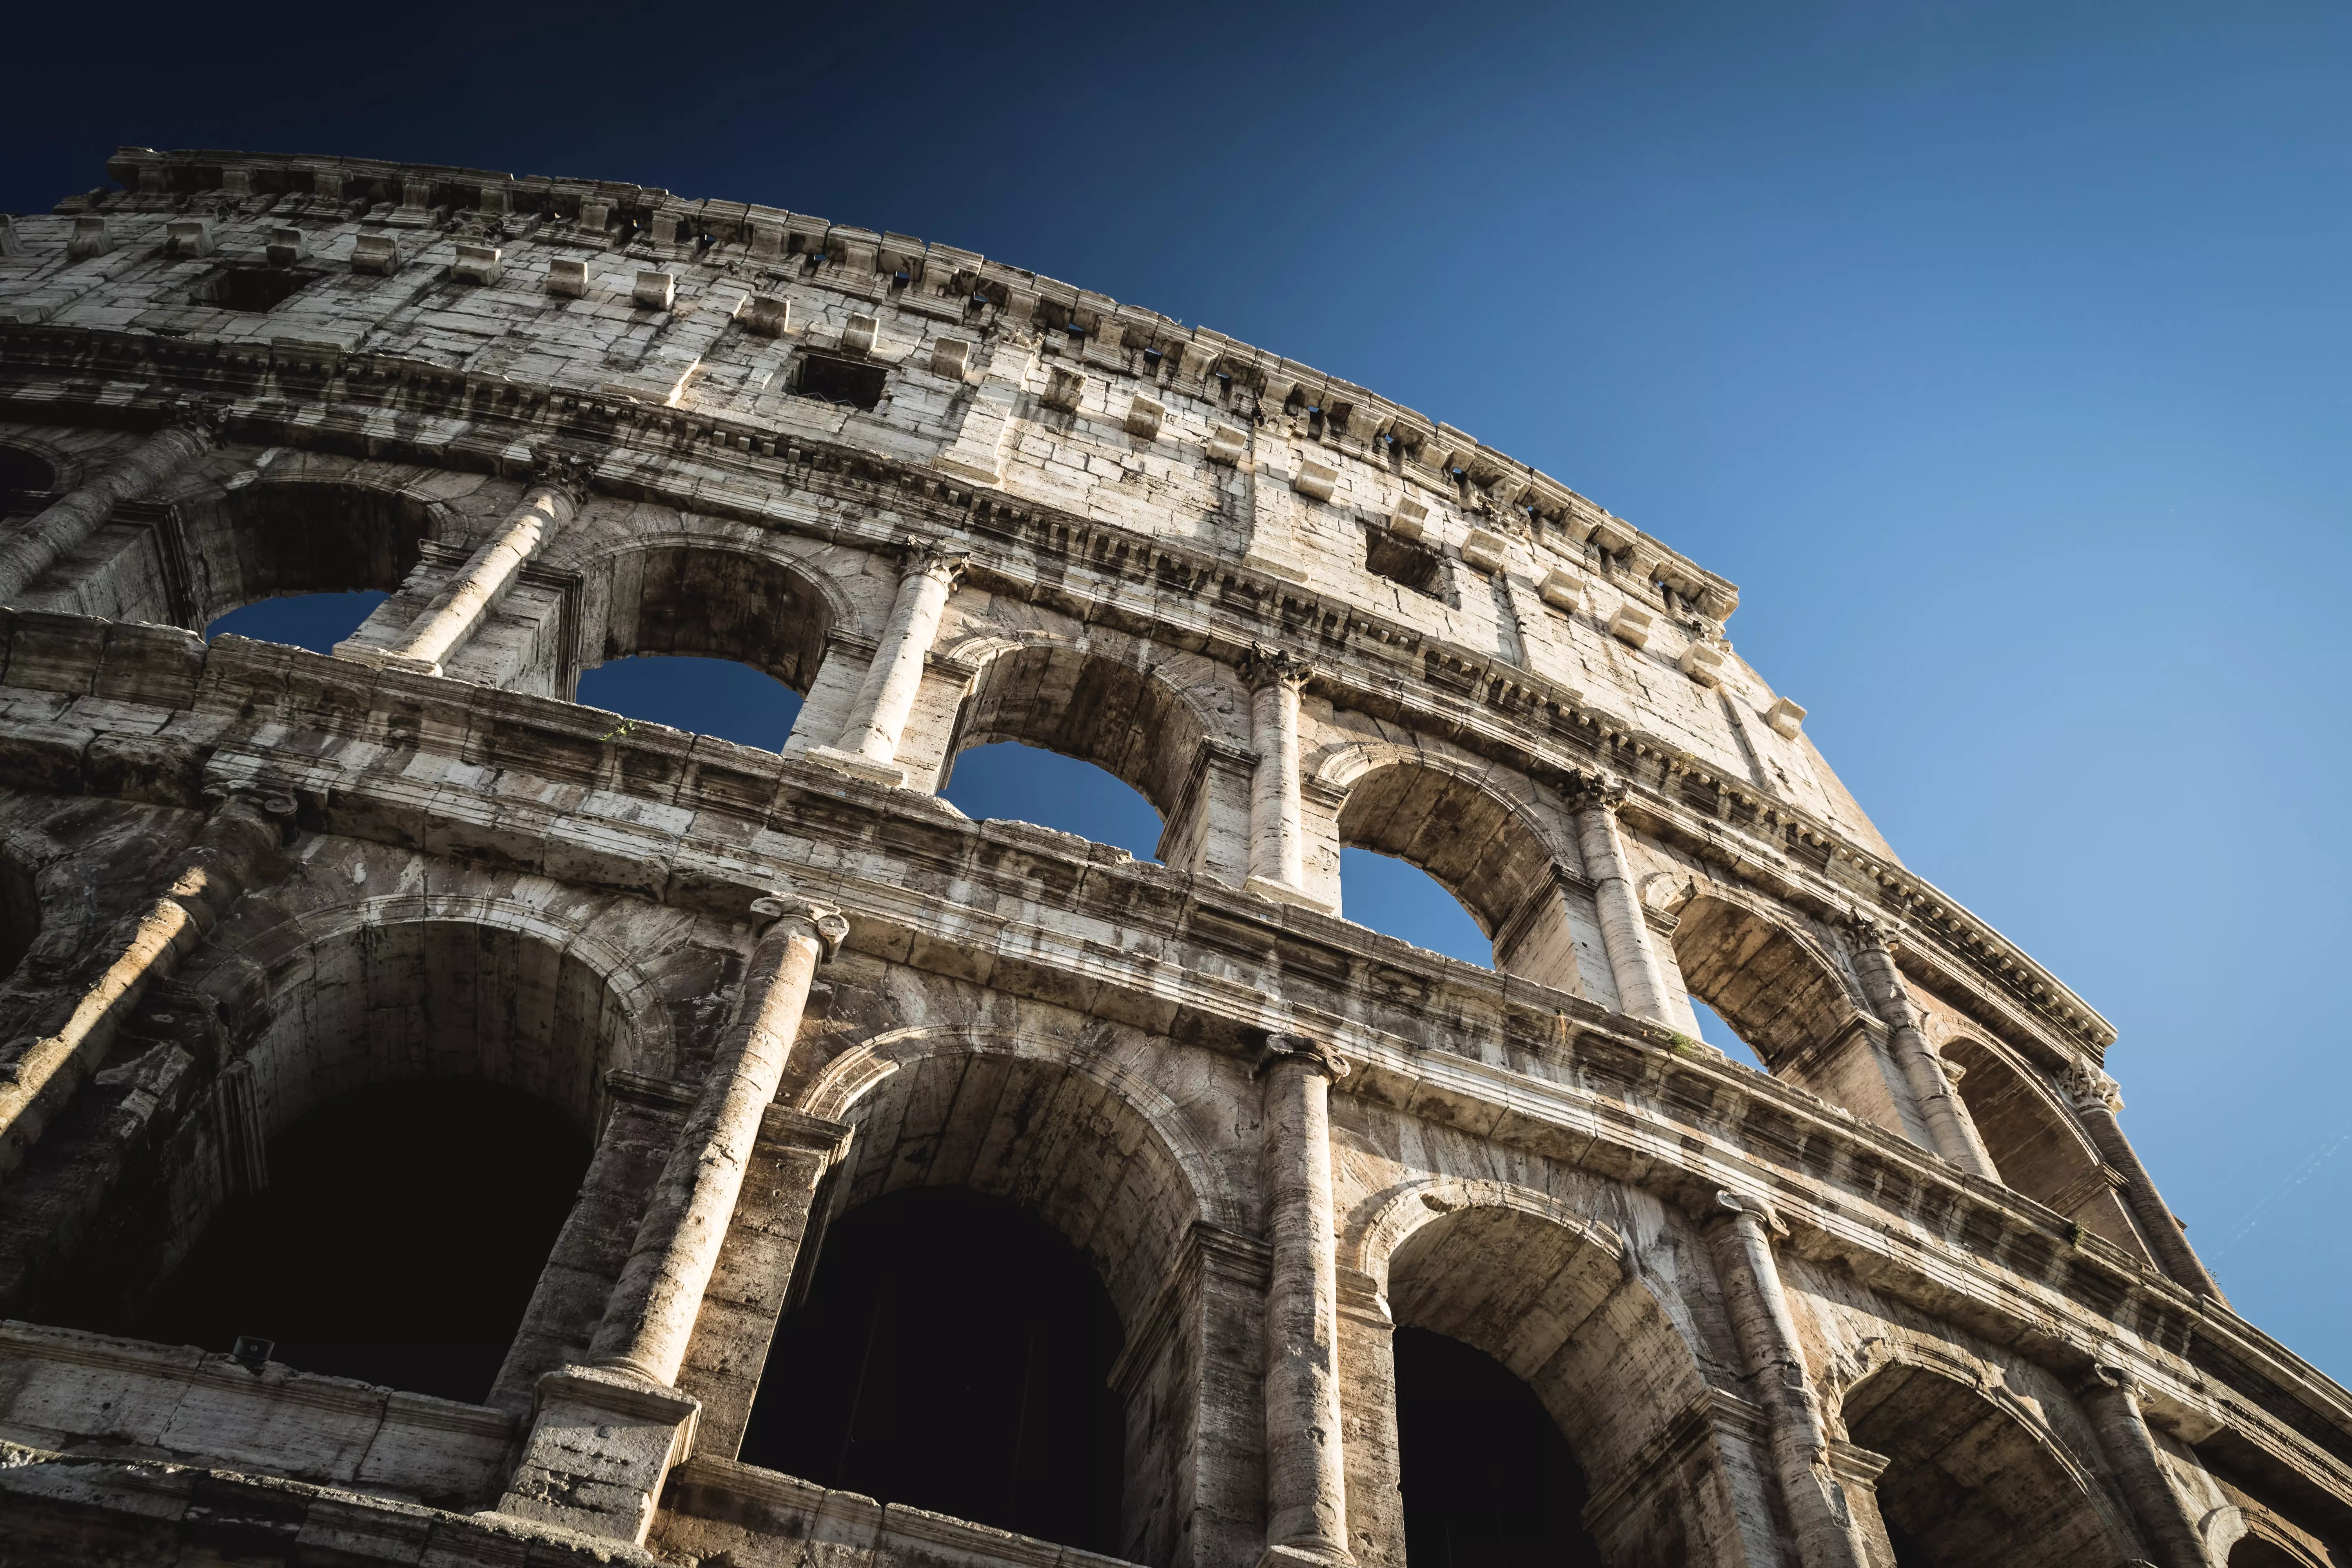 One of the most visited tourist attractions in the world - the Colosseum